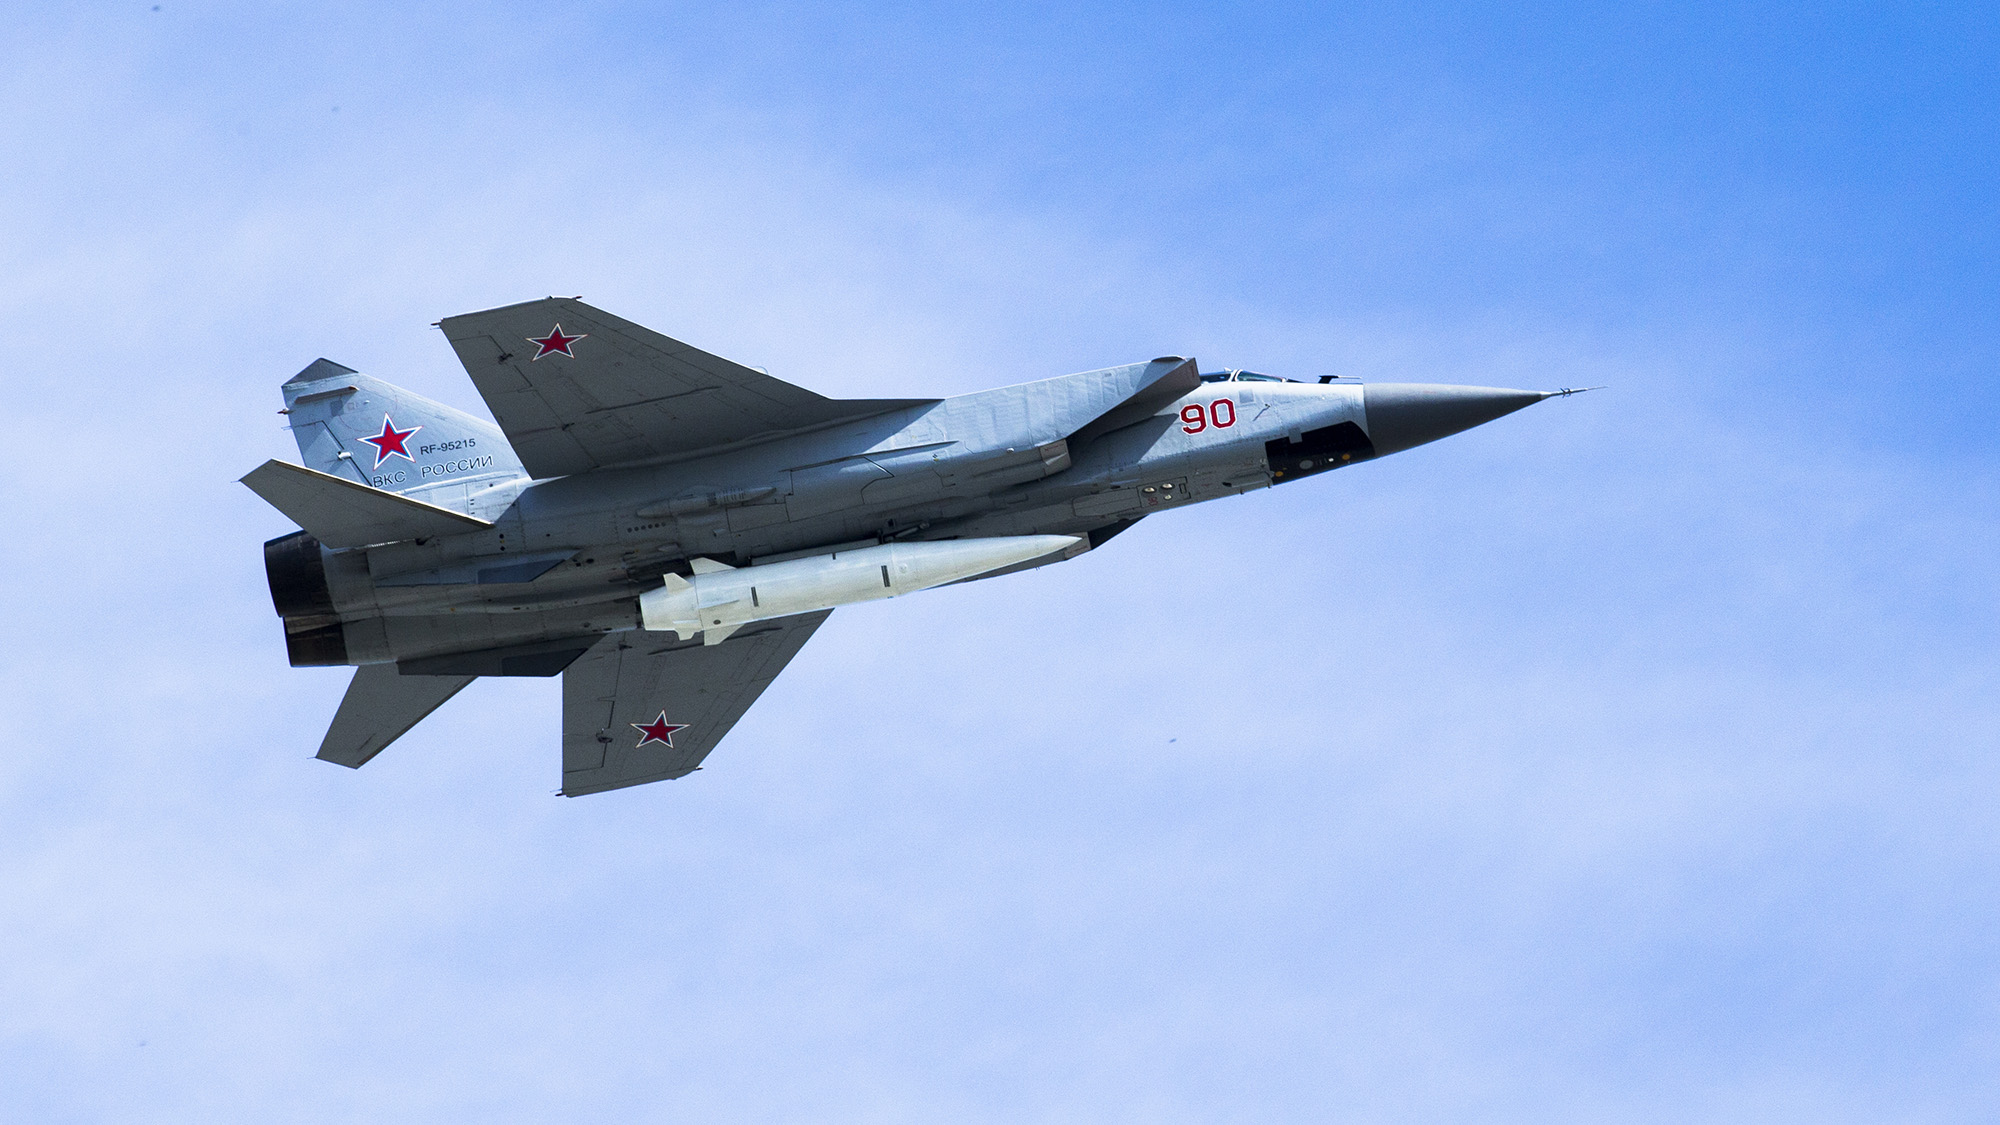 A Russian Air Force MiG-31K jet carries a high-precision hypersonic aero-ballistic missile Kh-47M2 Kinzhal during the Victory Day military parade in Moscow this May 9, 2018 ima